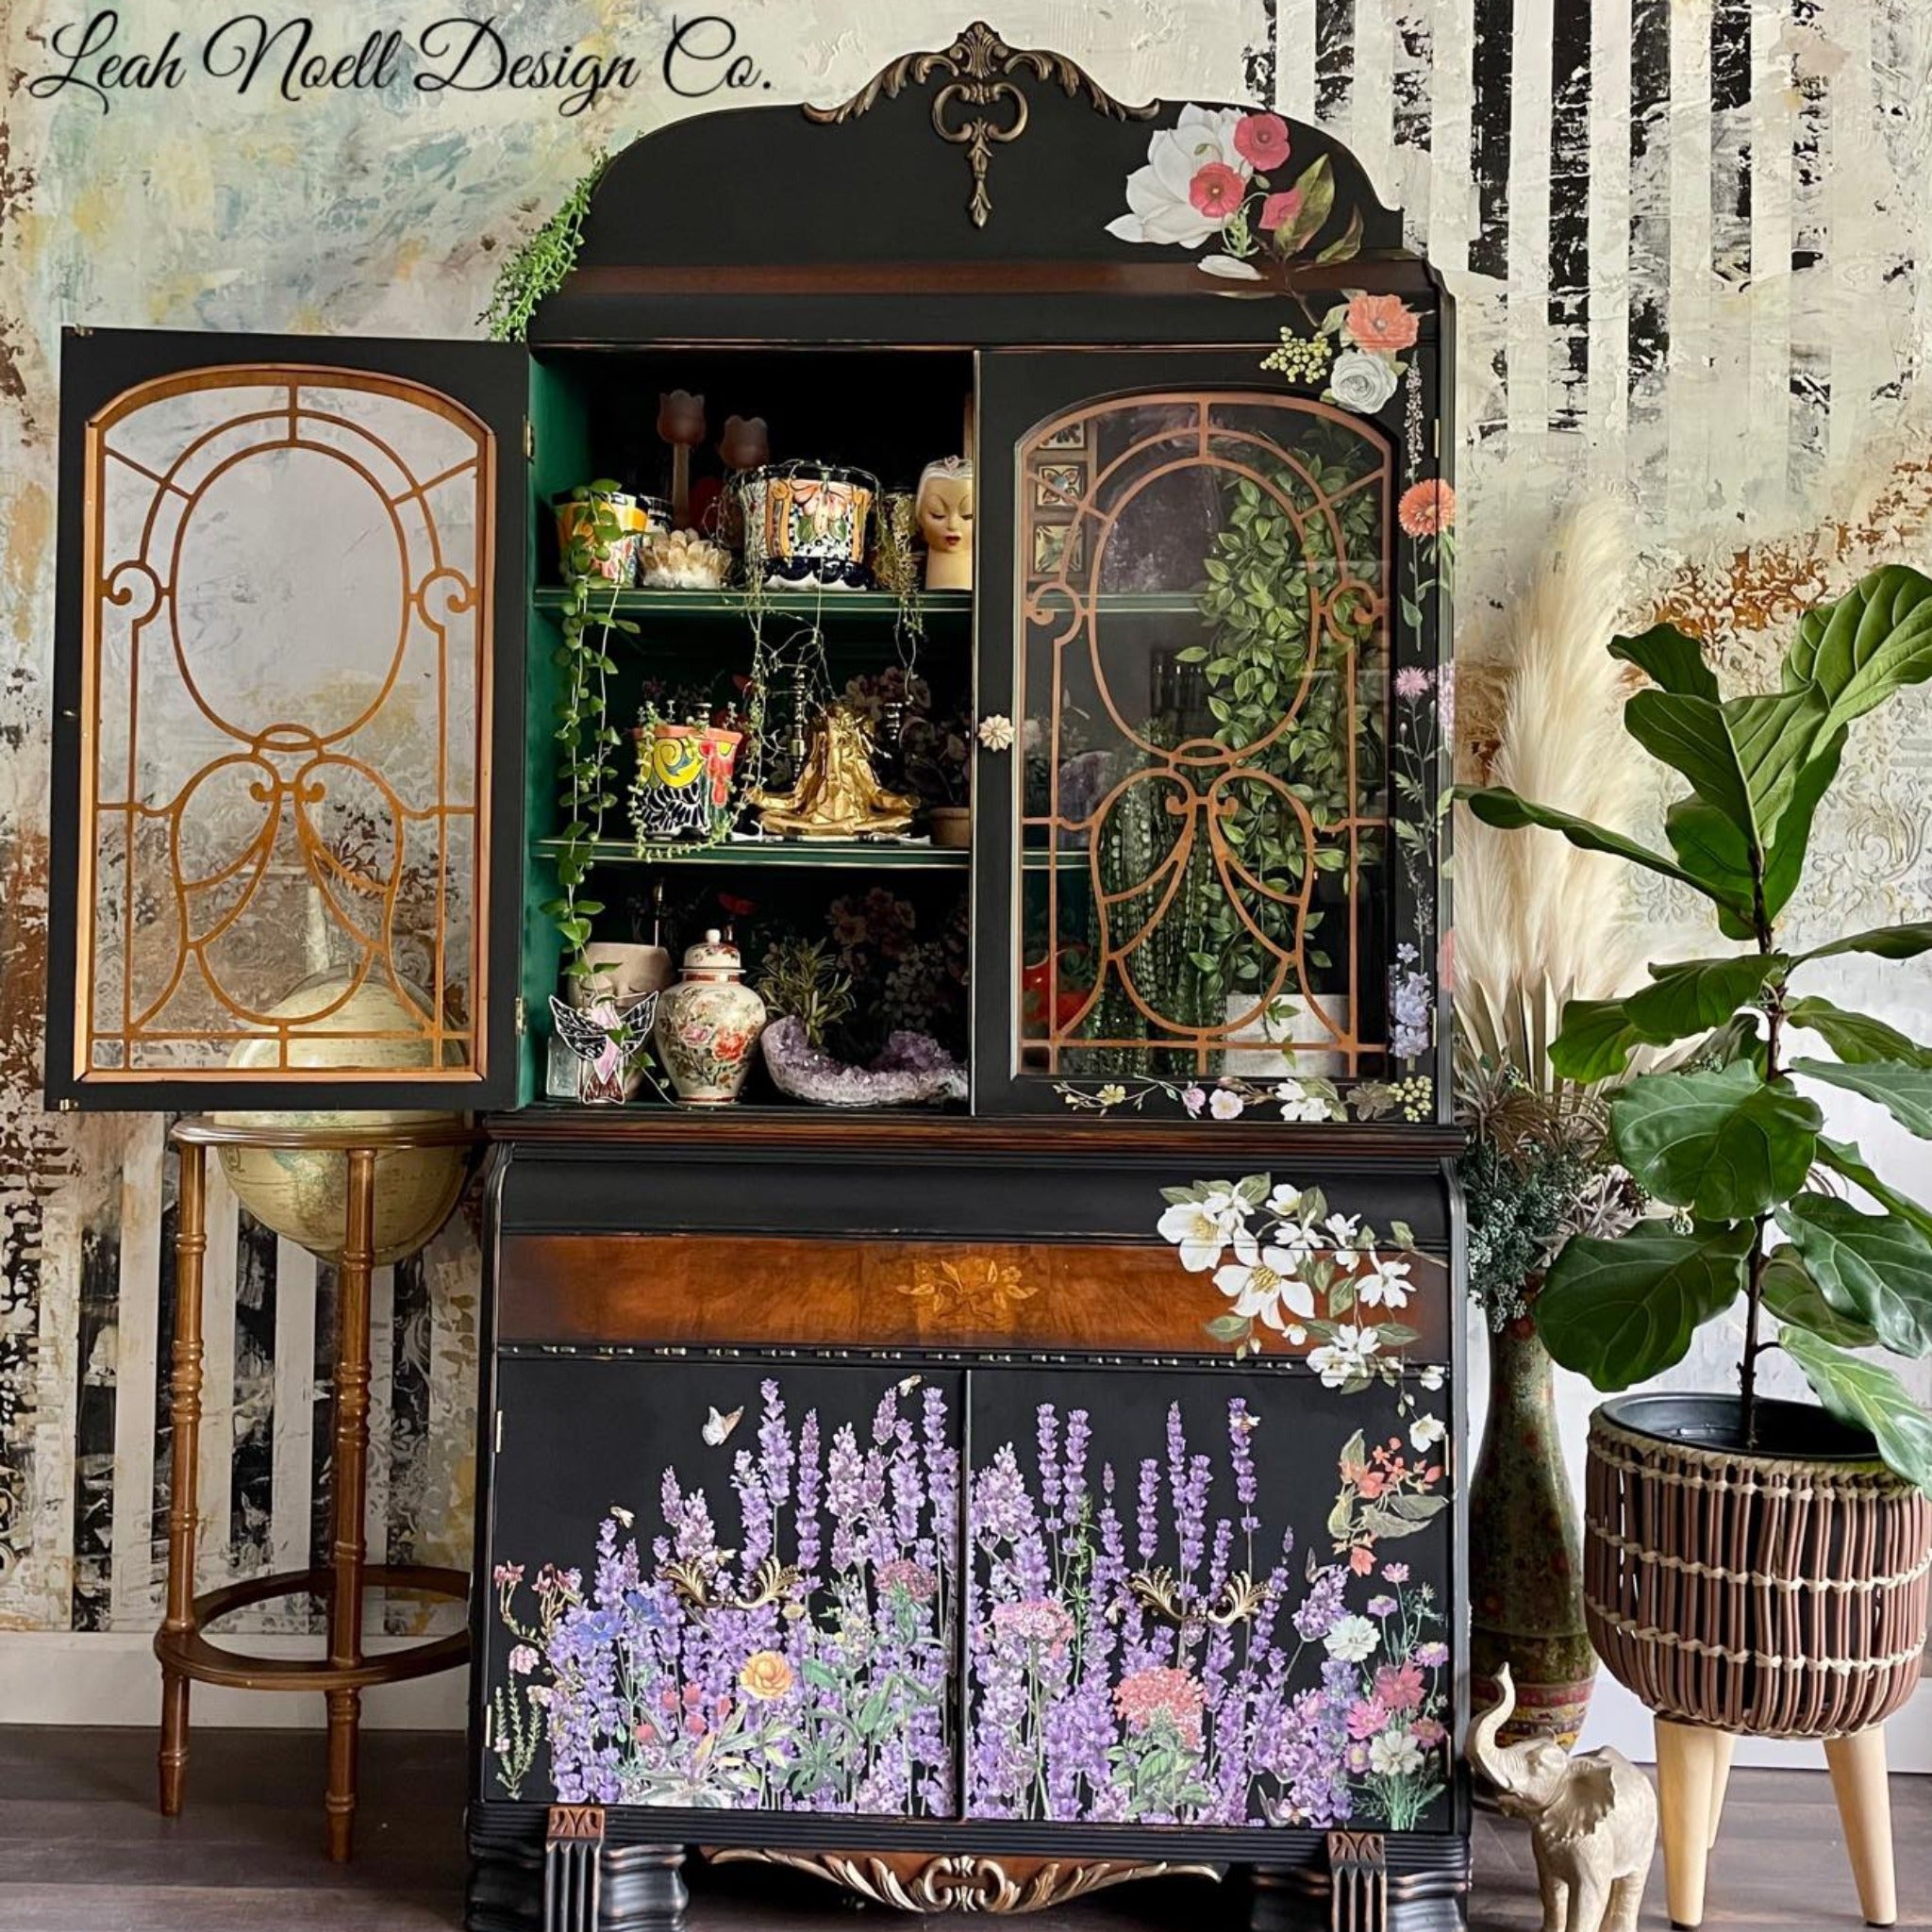 A vintage hutch cabinet refurbished by Leah Noell Design Co. is painted flat black with natural wood accents and features ReDesign with Prima's Champs de Lavende transfer on its 2 bottom doors.